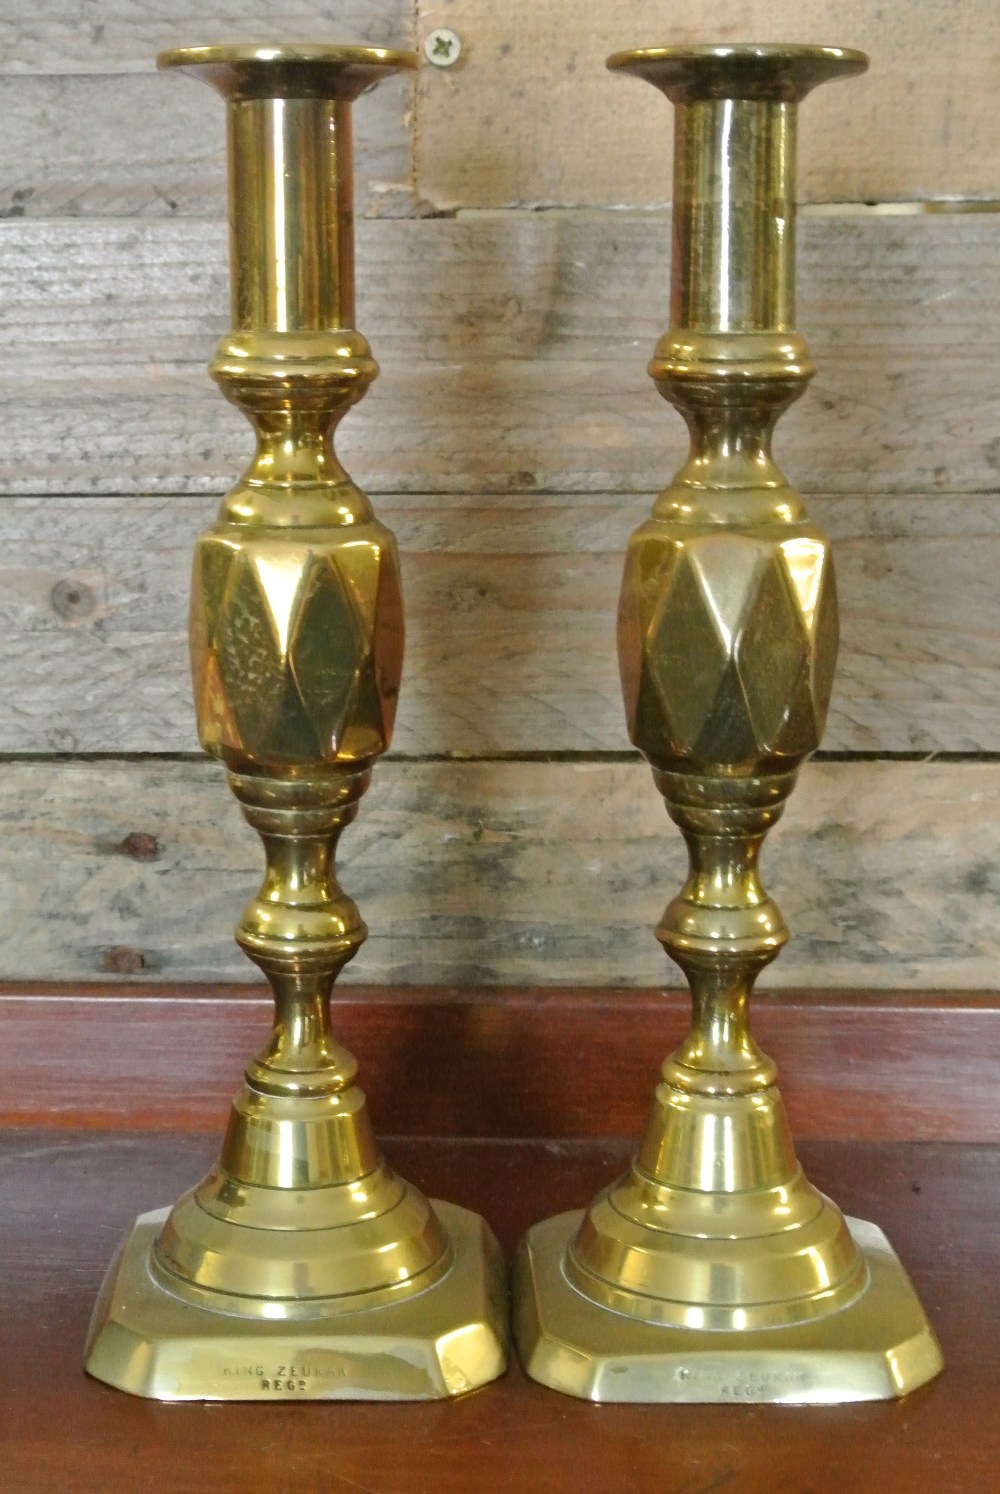 COLLECTABLES - A pair of antique brass candlestick